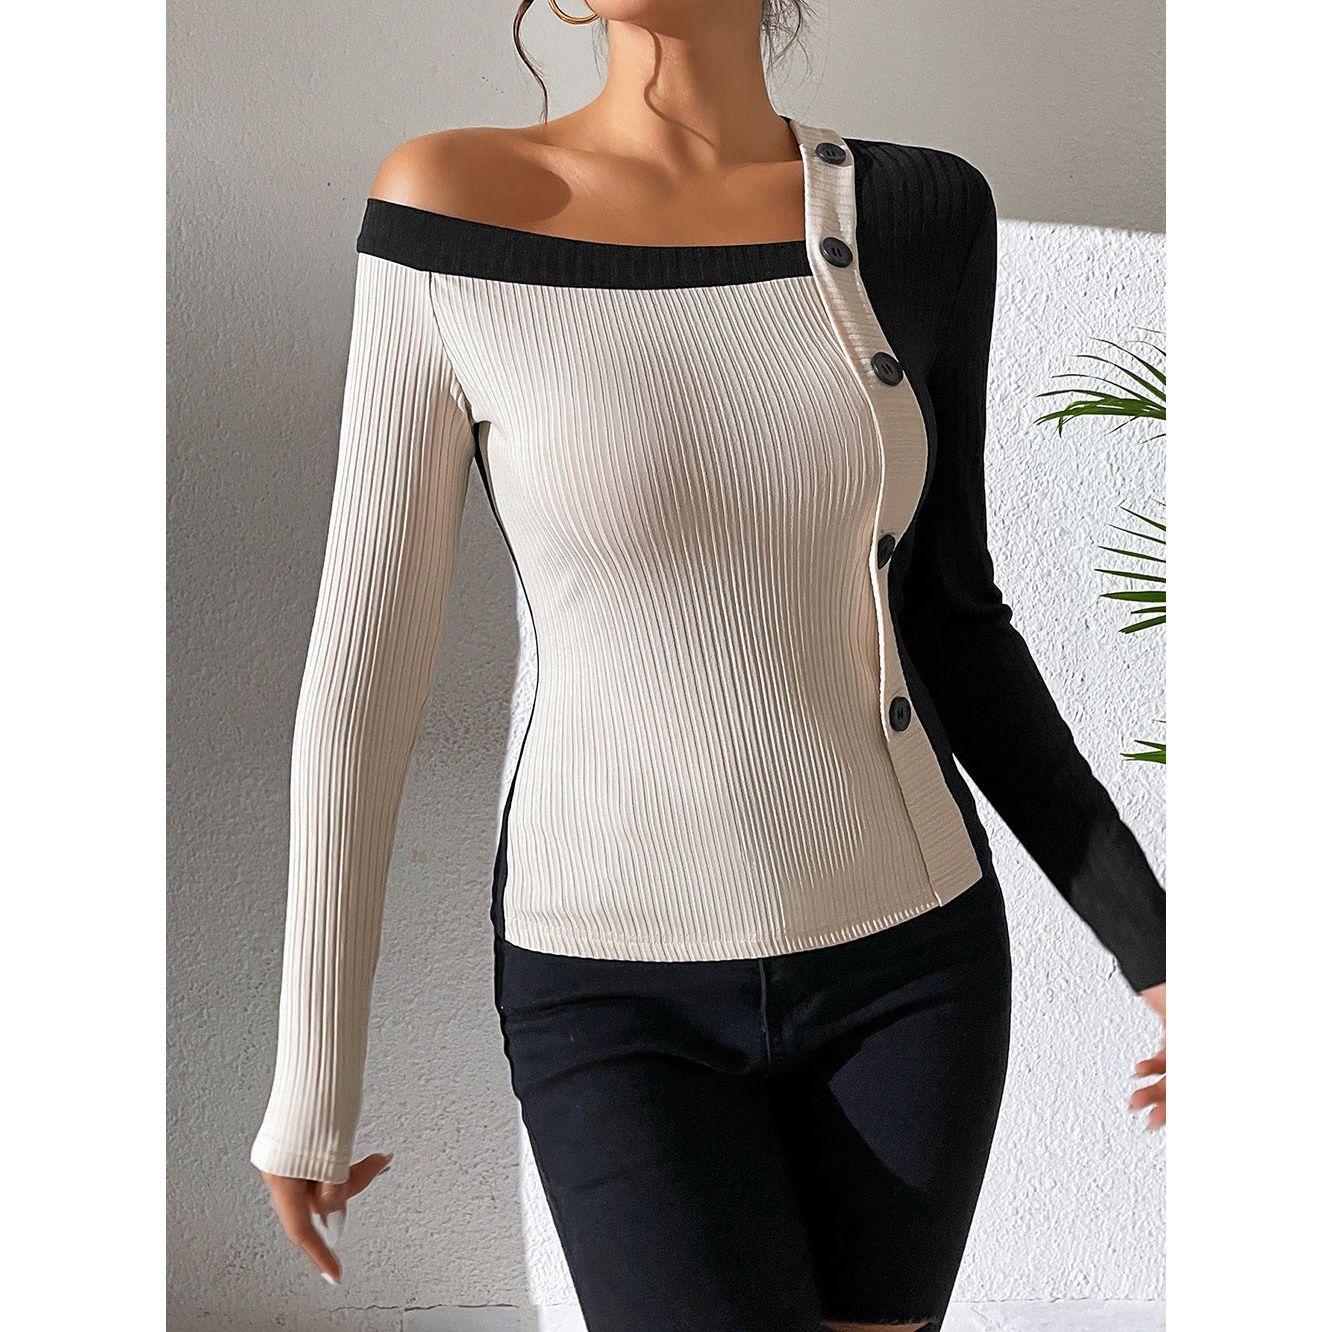 Women's Sexy Long Sleeve Off-shoulder Knitted T-shirt